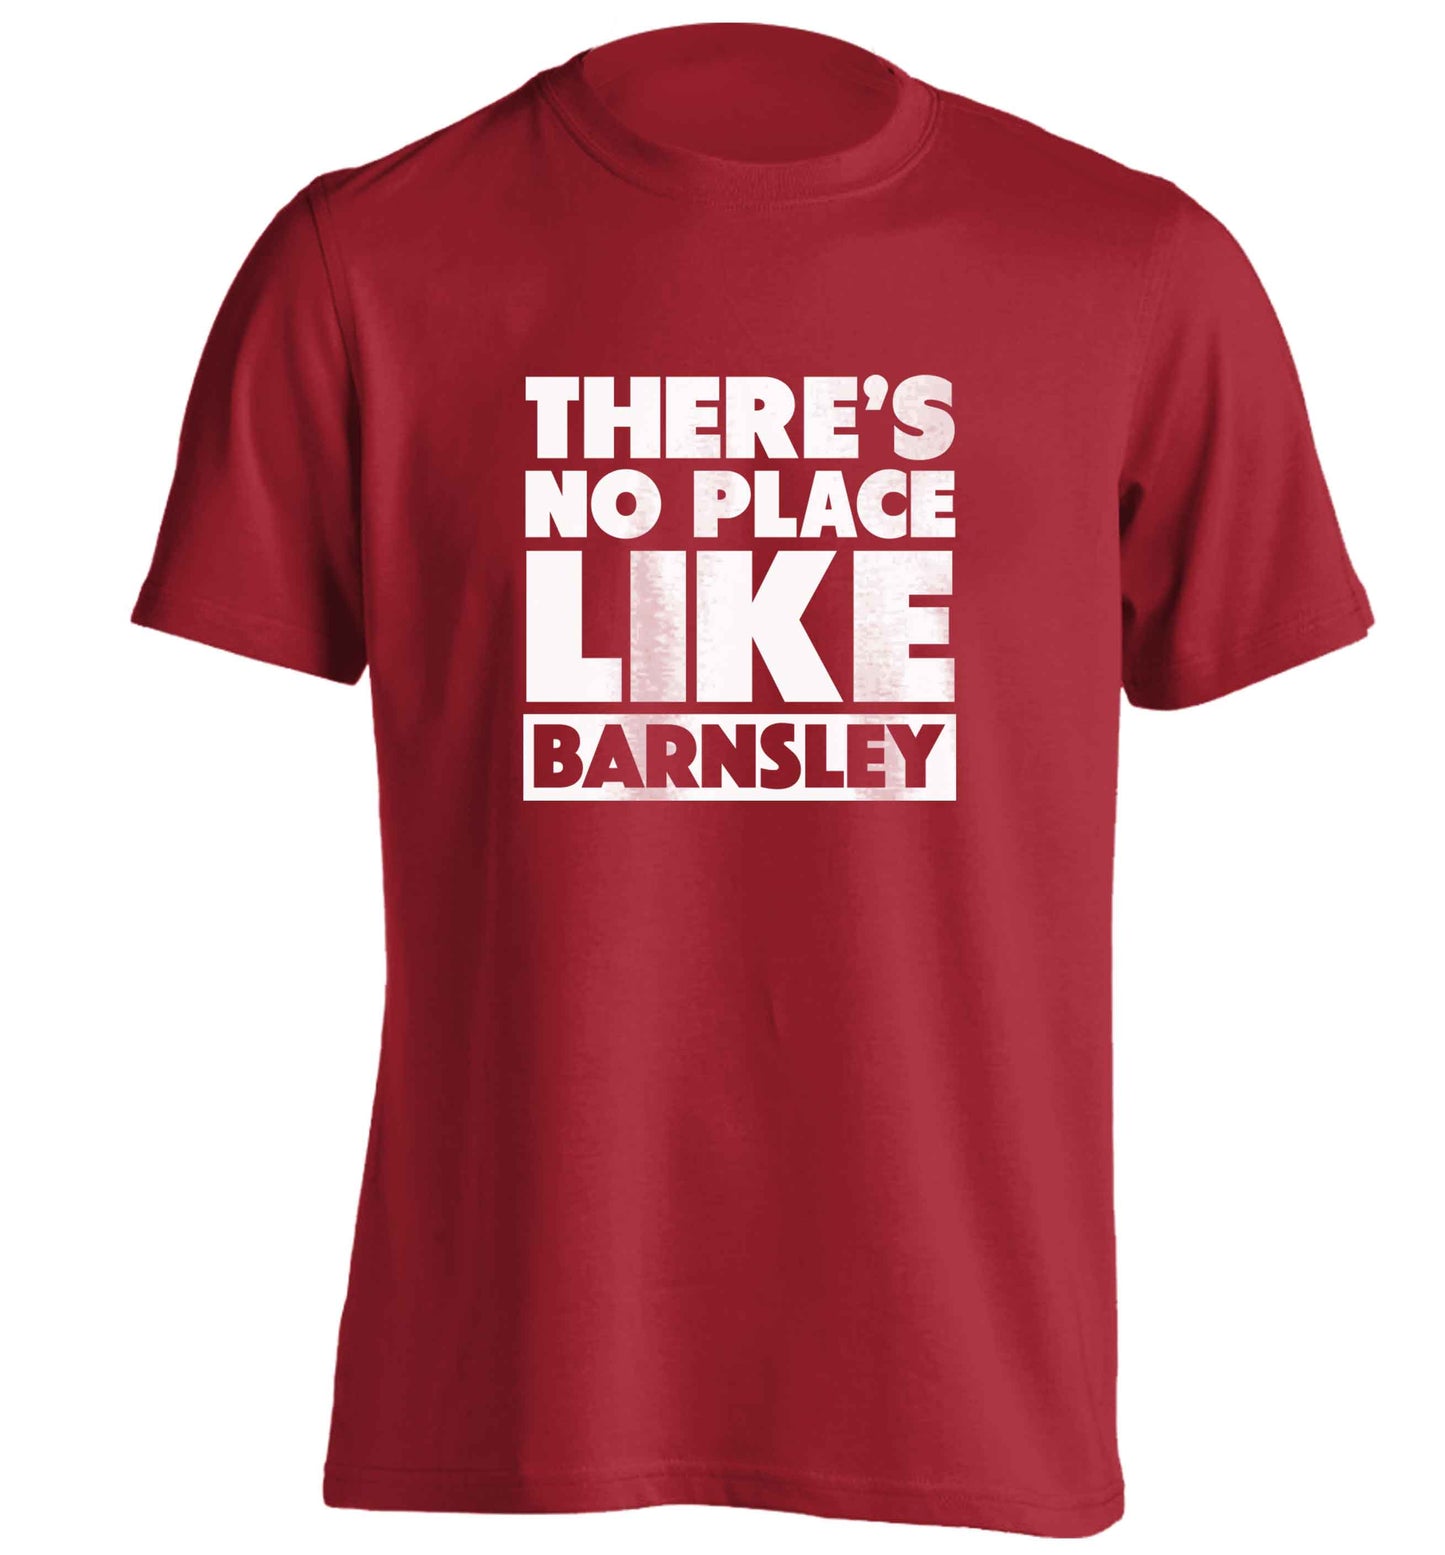 There's No Place Like Barnsley adults unisex red Tshirt 2XL